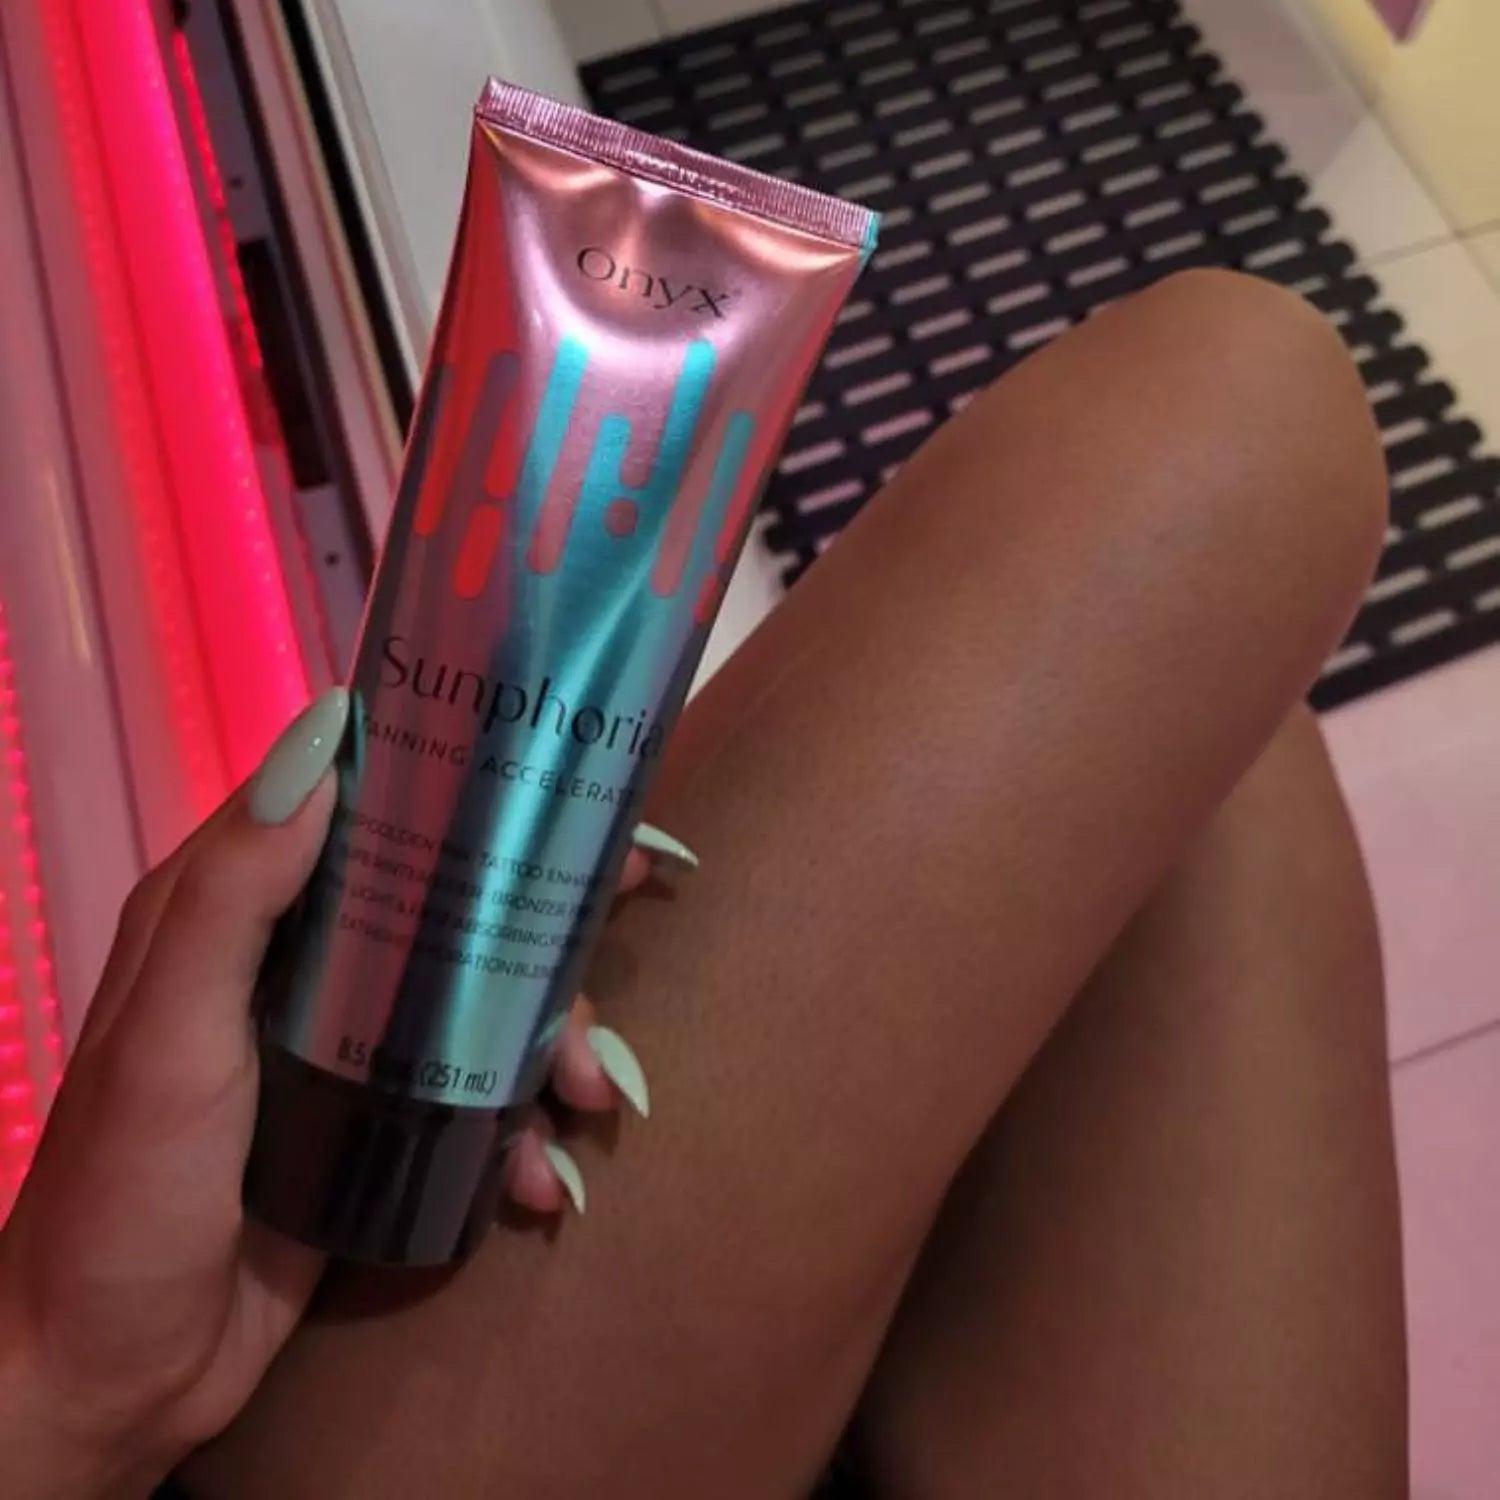 Sunphoria tanning lotion for indoor tanning beds